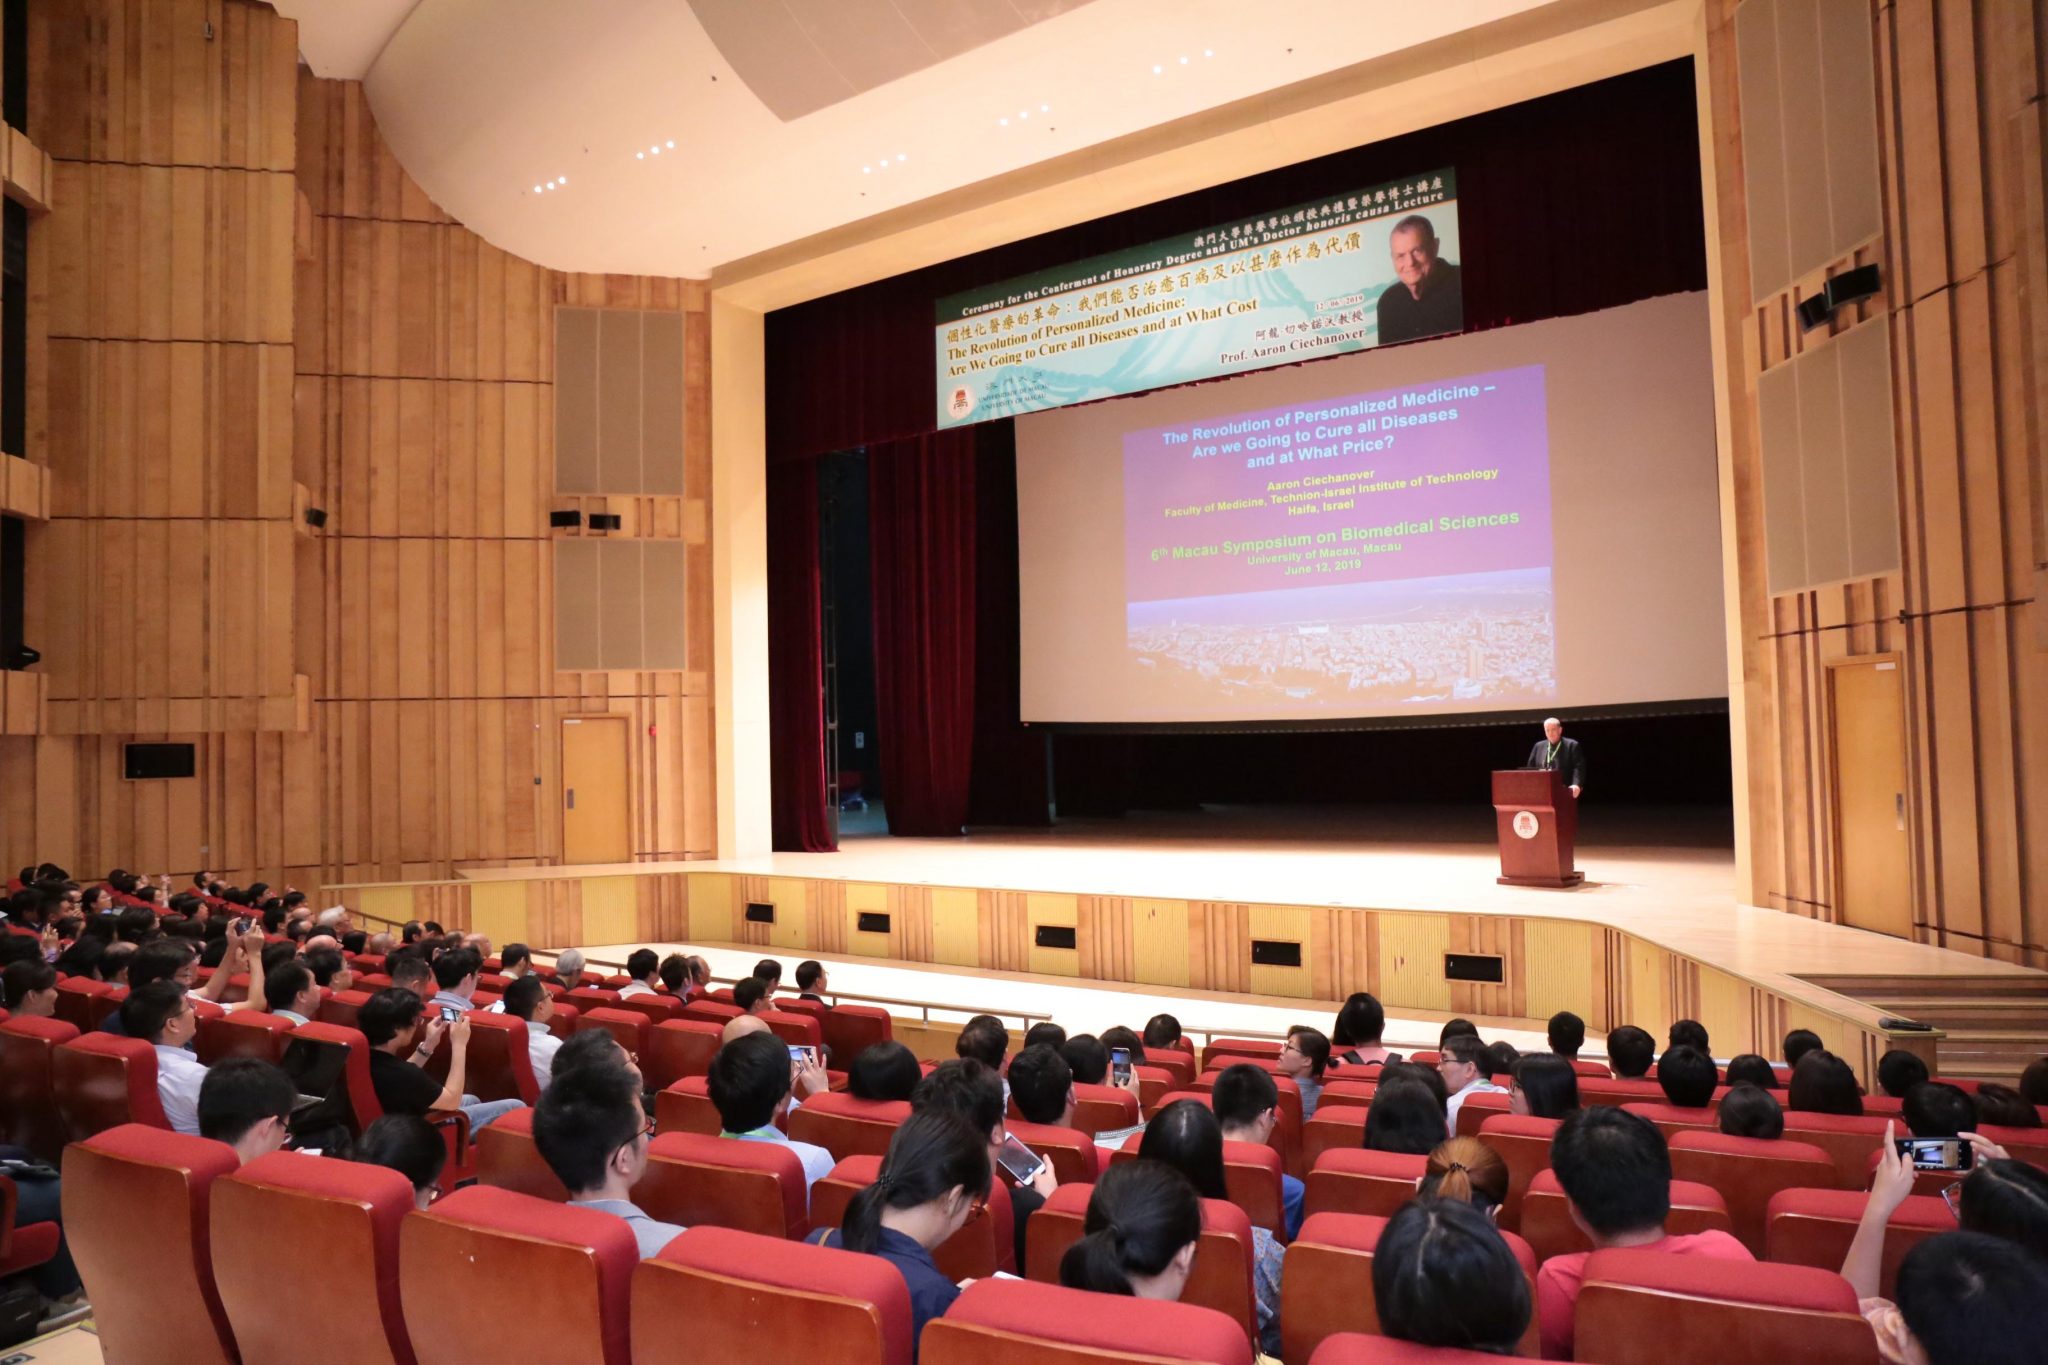 Over 400 medical experts discuss cutting-edge technologies at UM